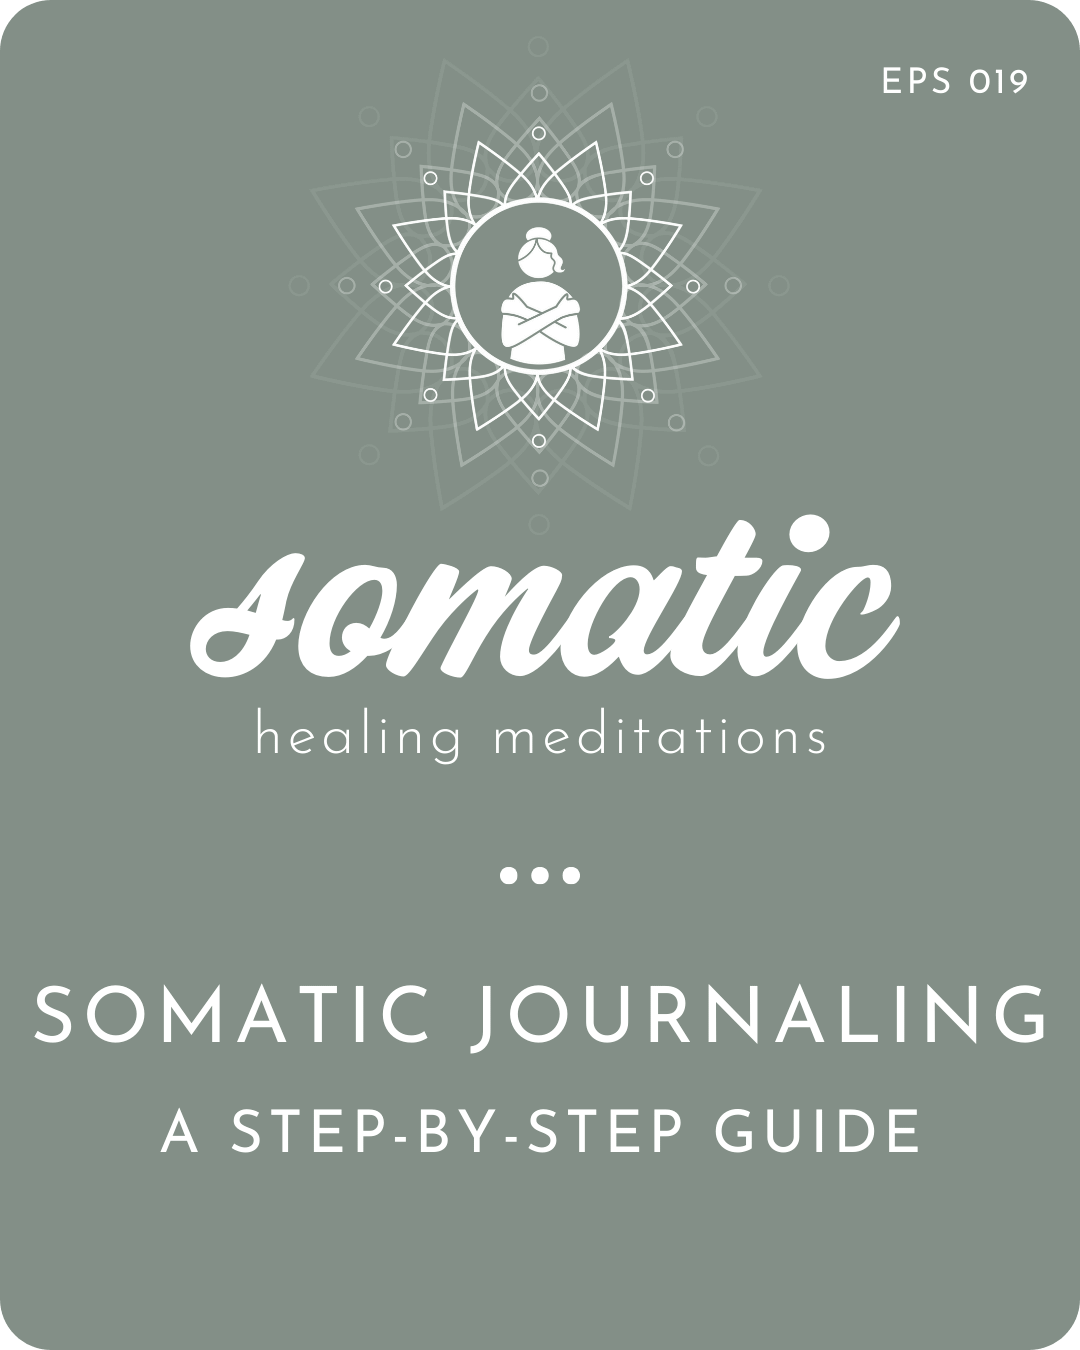 Somatic Journaling: A Step-By-Step Guide